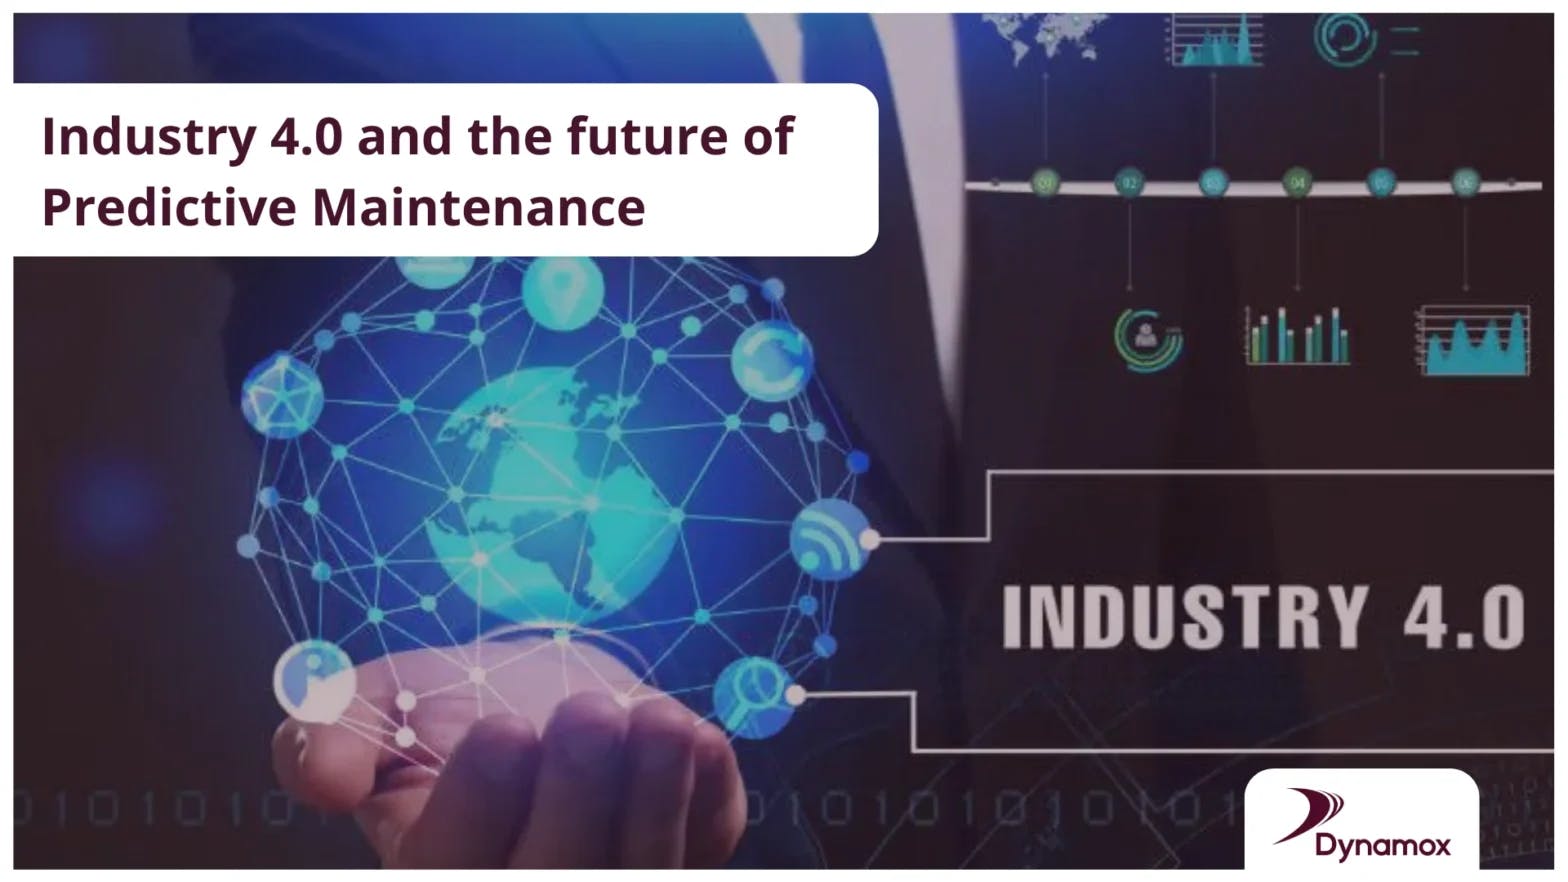 Industry 4.0 and the future of Predictive Maintenance